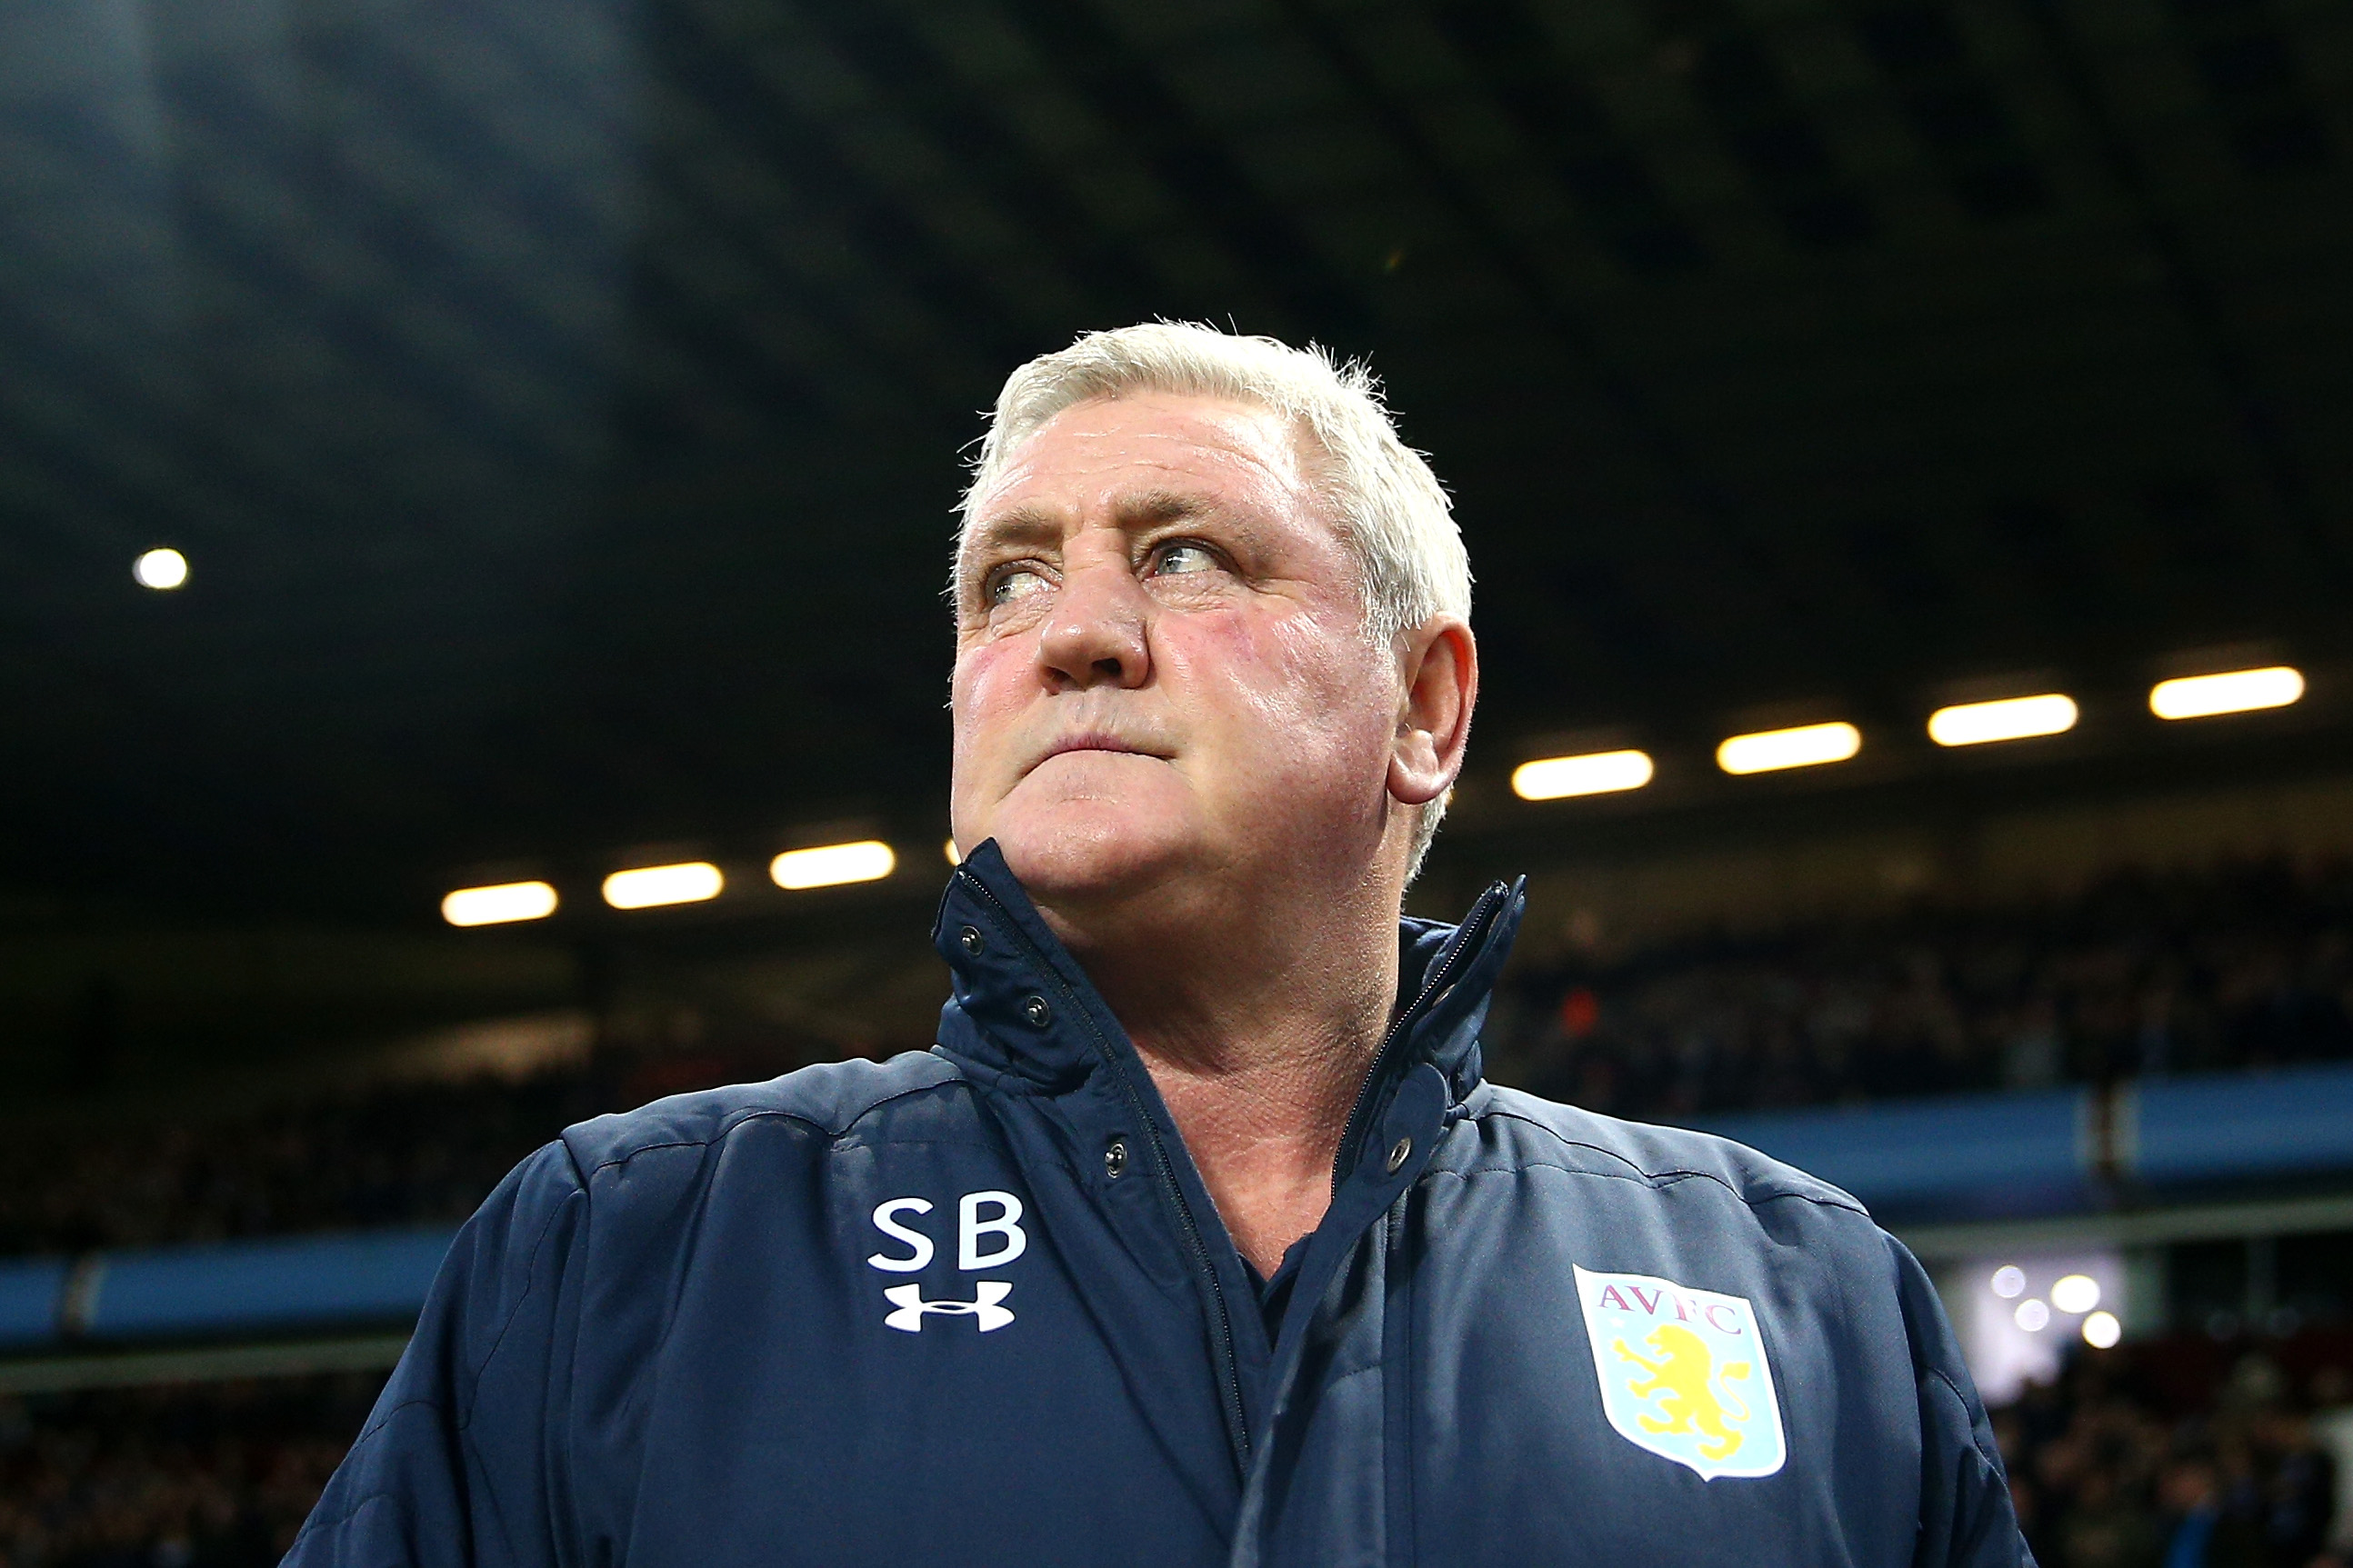 BIRMINGHAM, ENGLAND - DECEMBER 29: Steve Bruce, Manager of Aston Villa looks on during the Sky Bet Championship match between Aston Villa and Leeds United at Villa Park on December 29, 2016 in Birmingham, England.  (Photo by Alex Pantling/Getty Images)